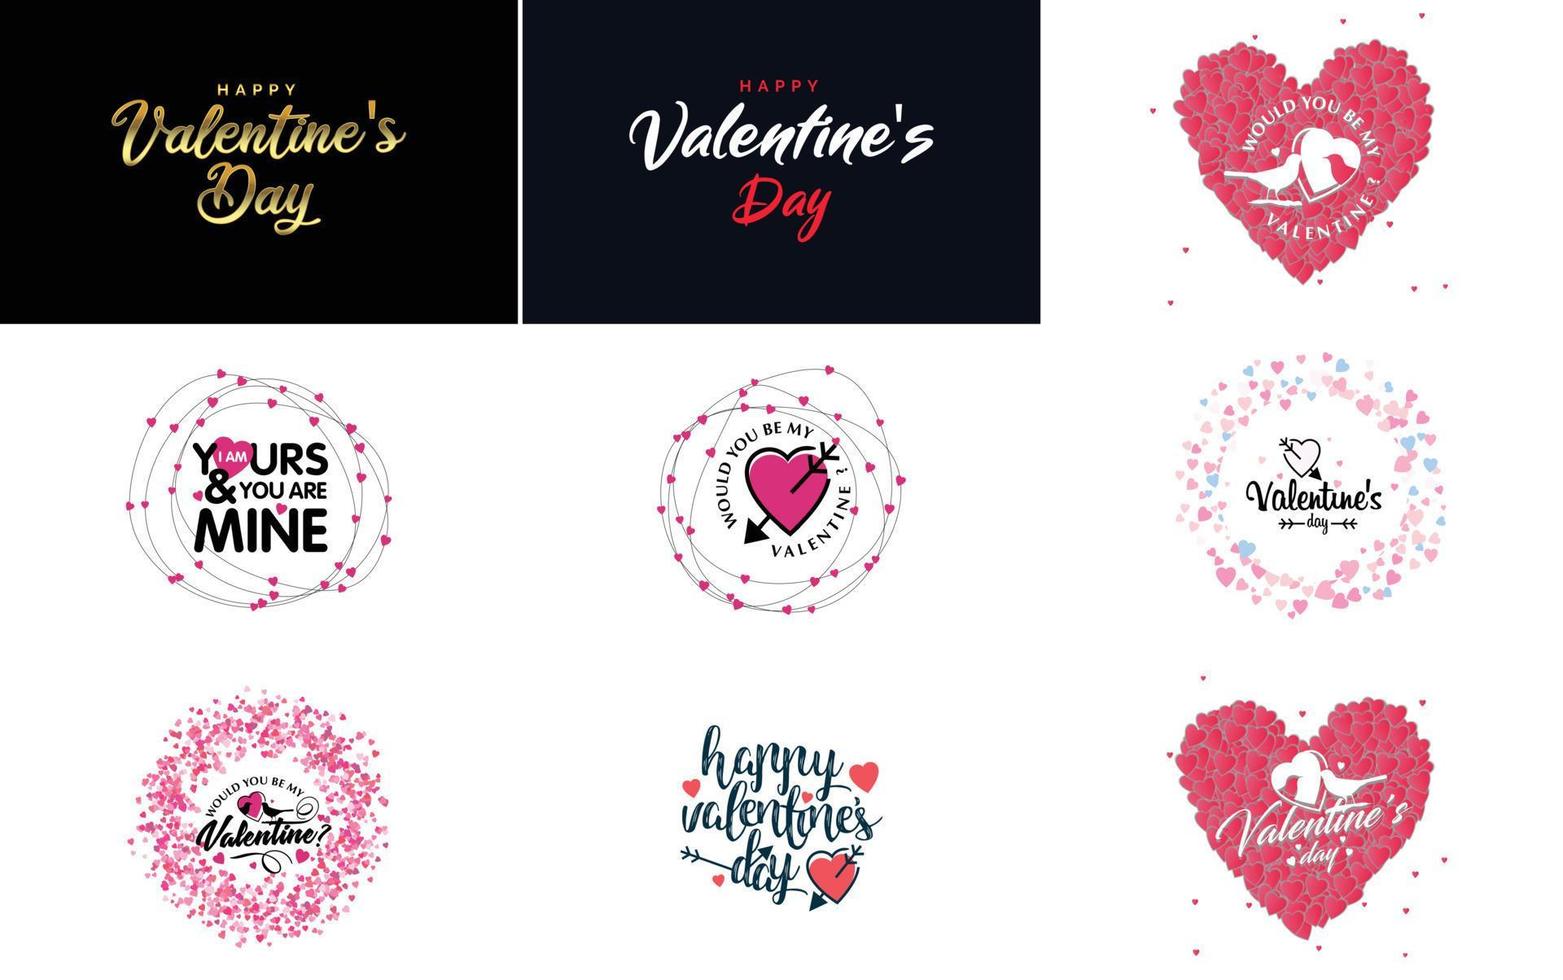 Valentine's and love word art designs with a heart-shaped theme vector